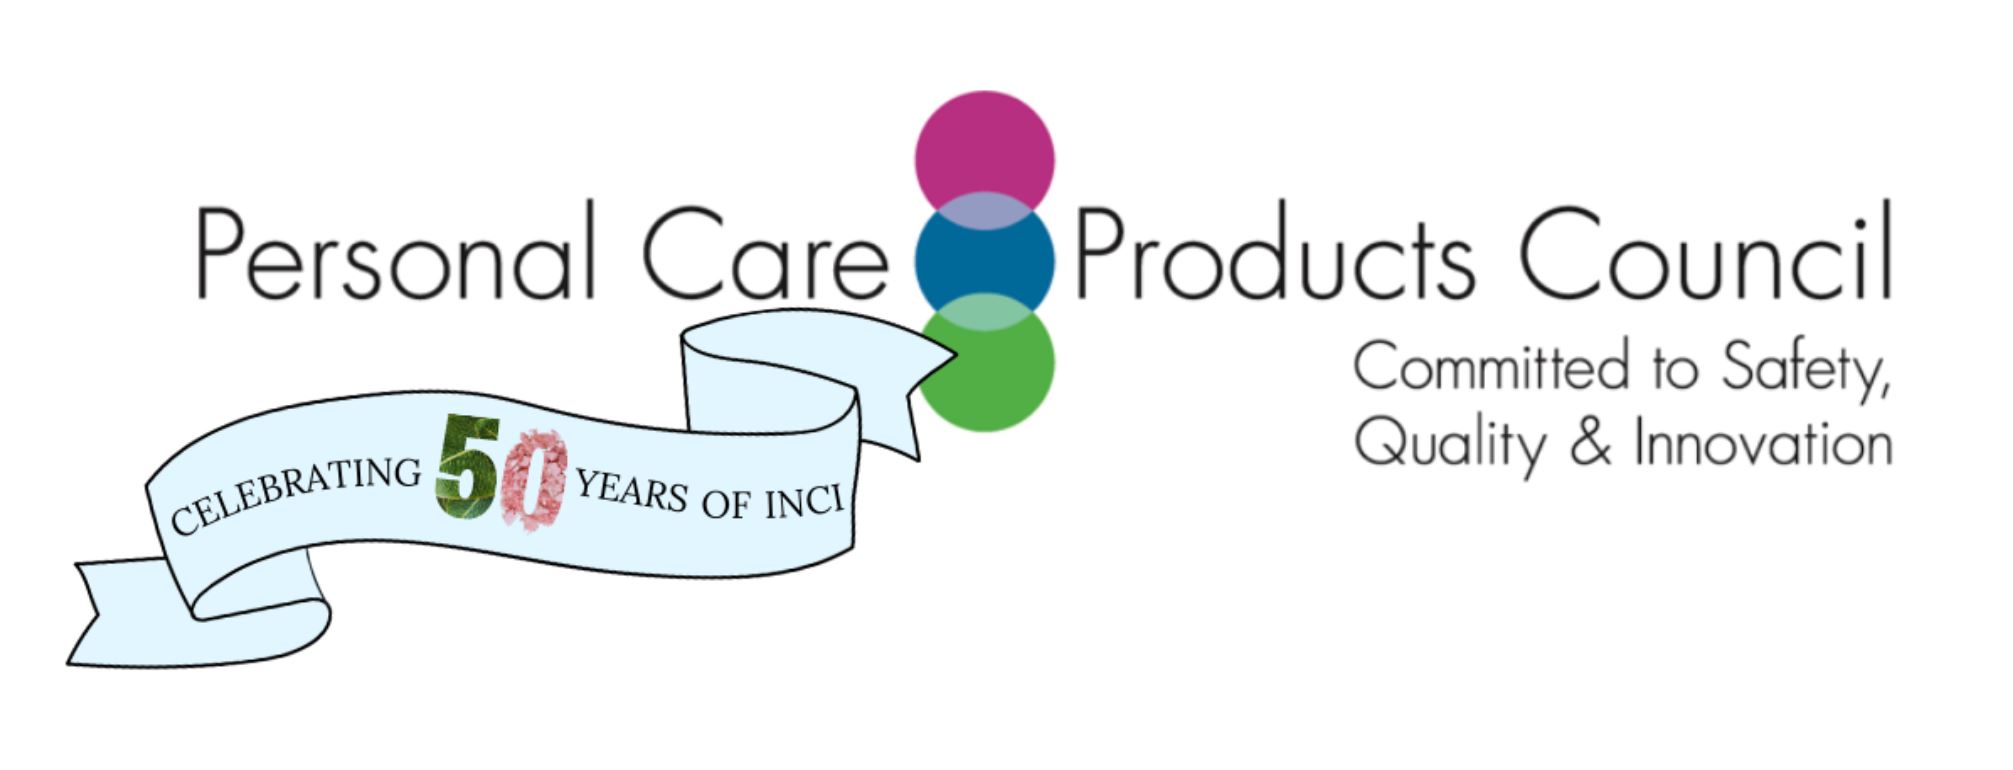 Personal Care Product Council logo